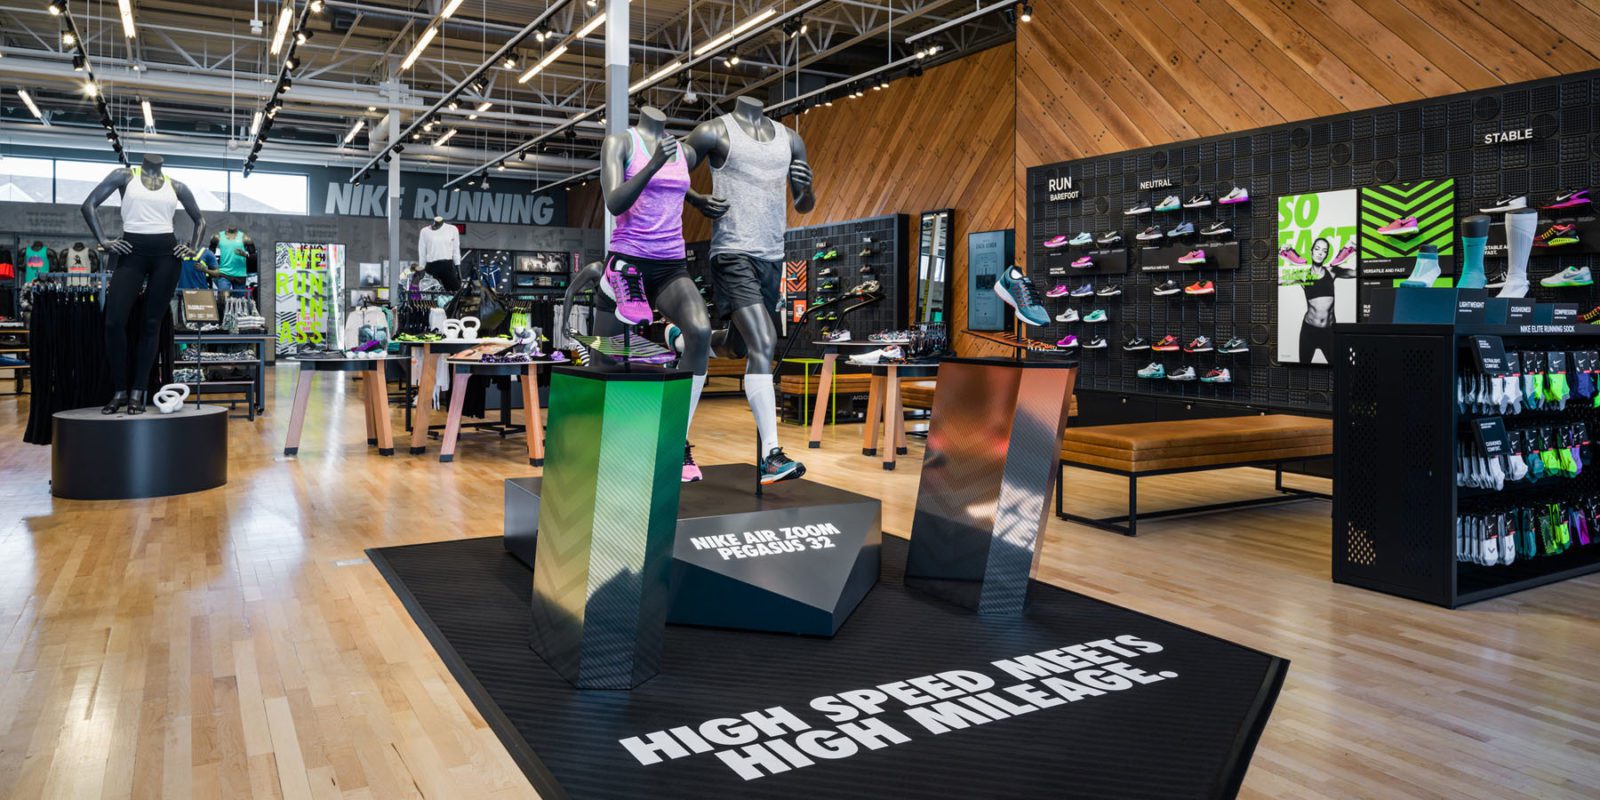 Panoramic view of Nike store branded environment